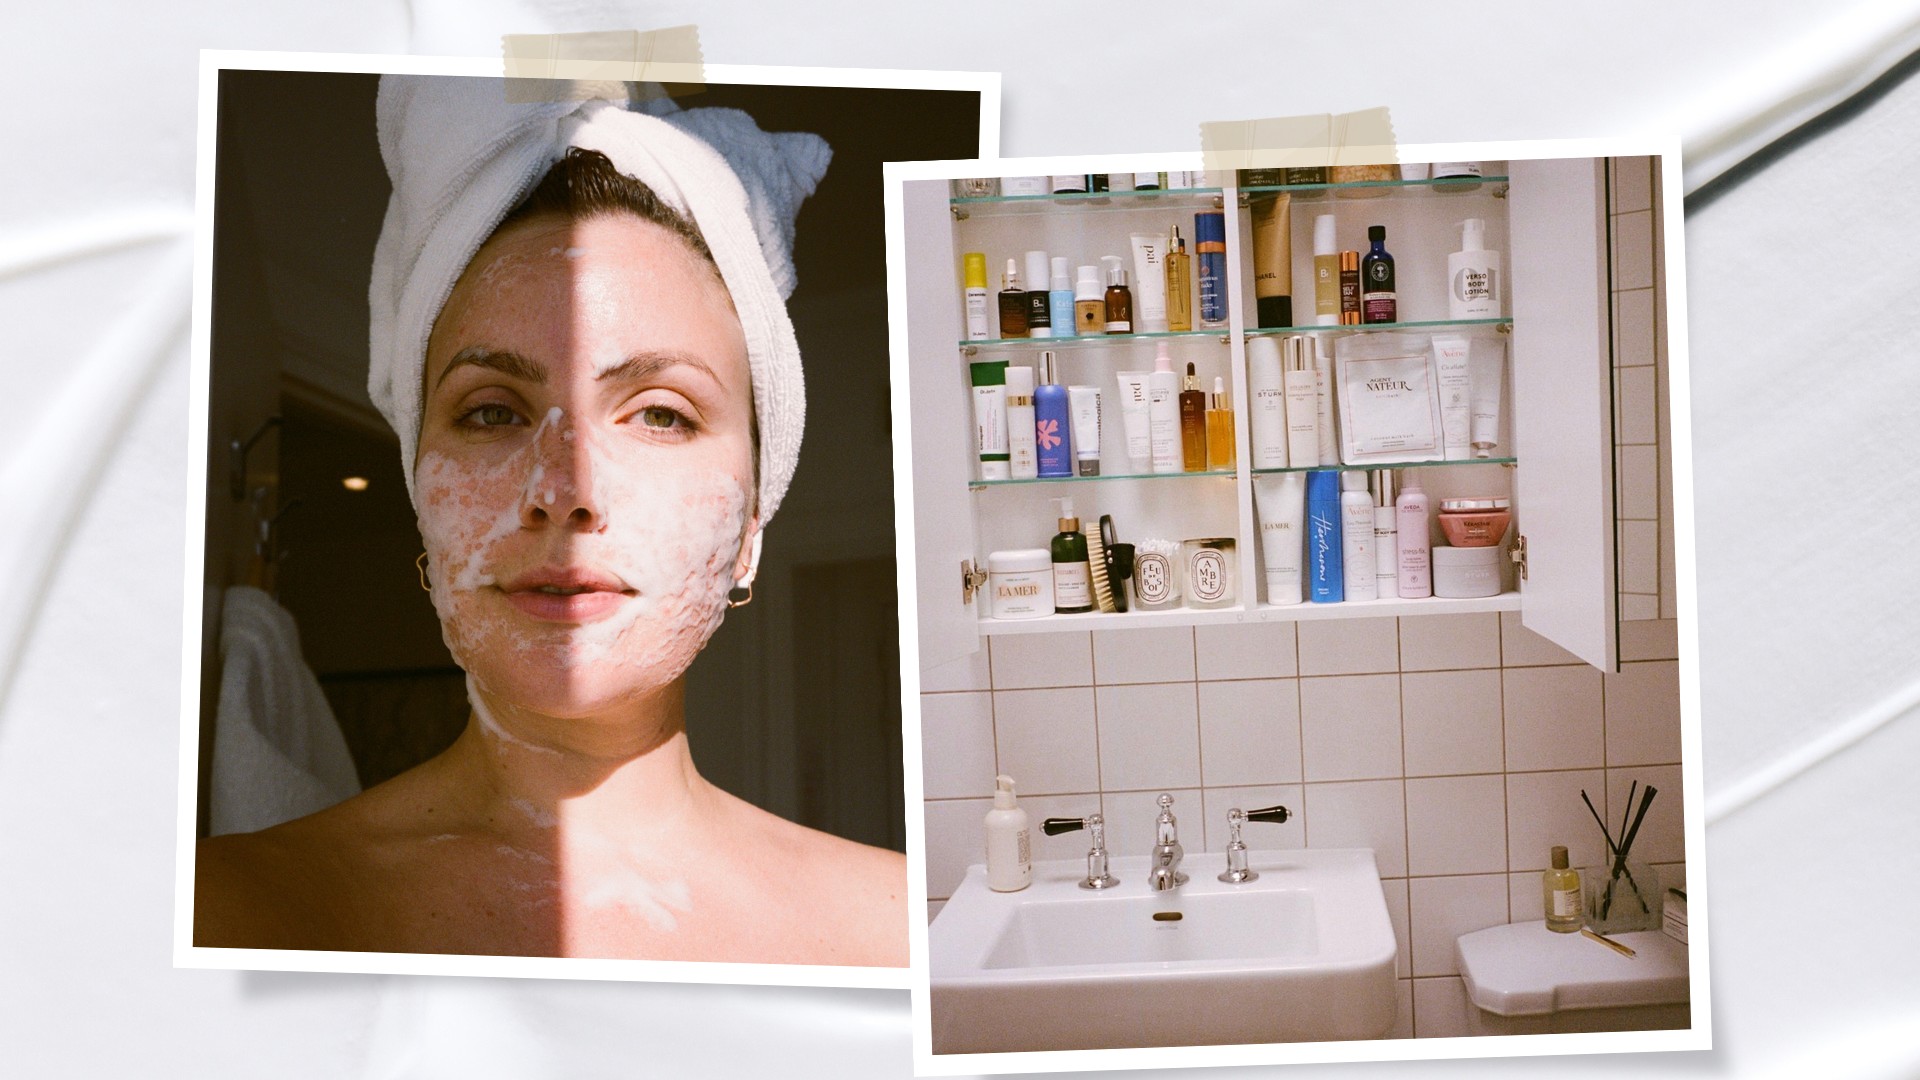 Influencer Emma Hoareau with skincare on her face and a photo of her bathroom 'shelfie'